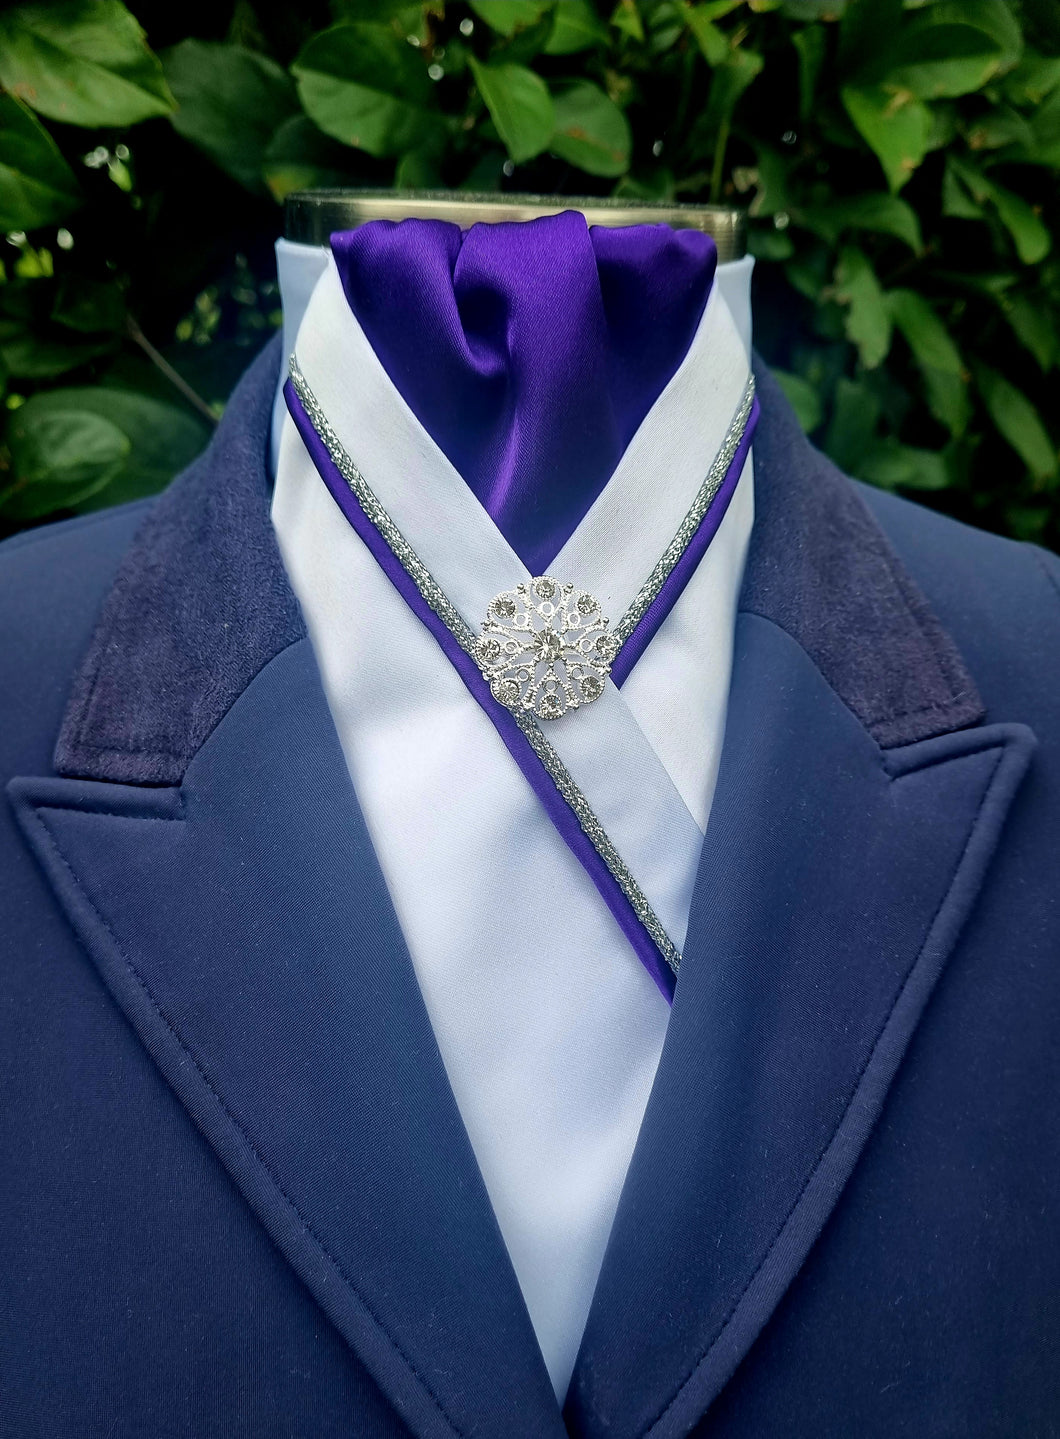 ERA RACHAEL STOCK TIE - White satin & purple with silver and purple piping & brooch